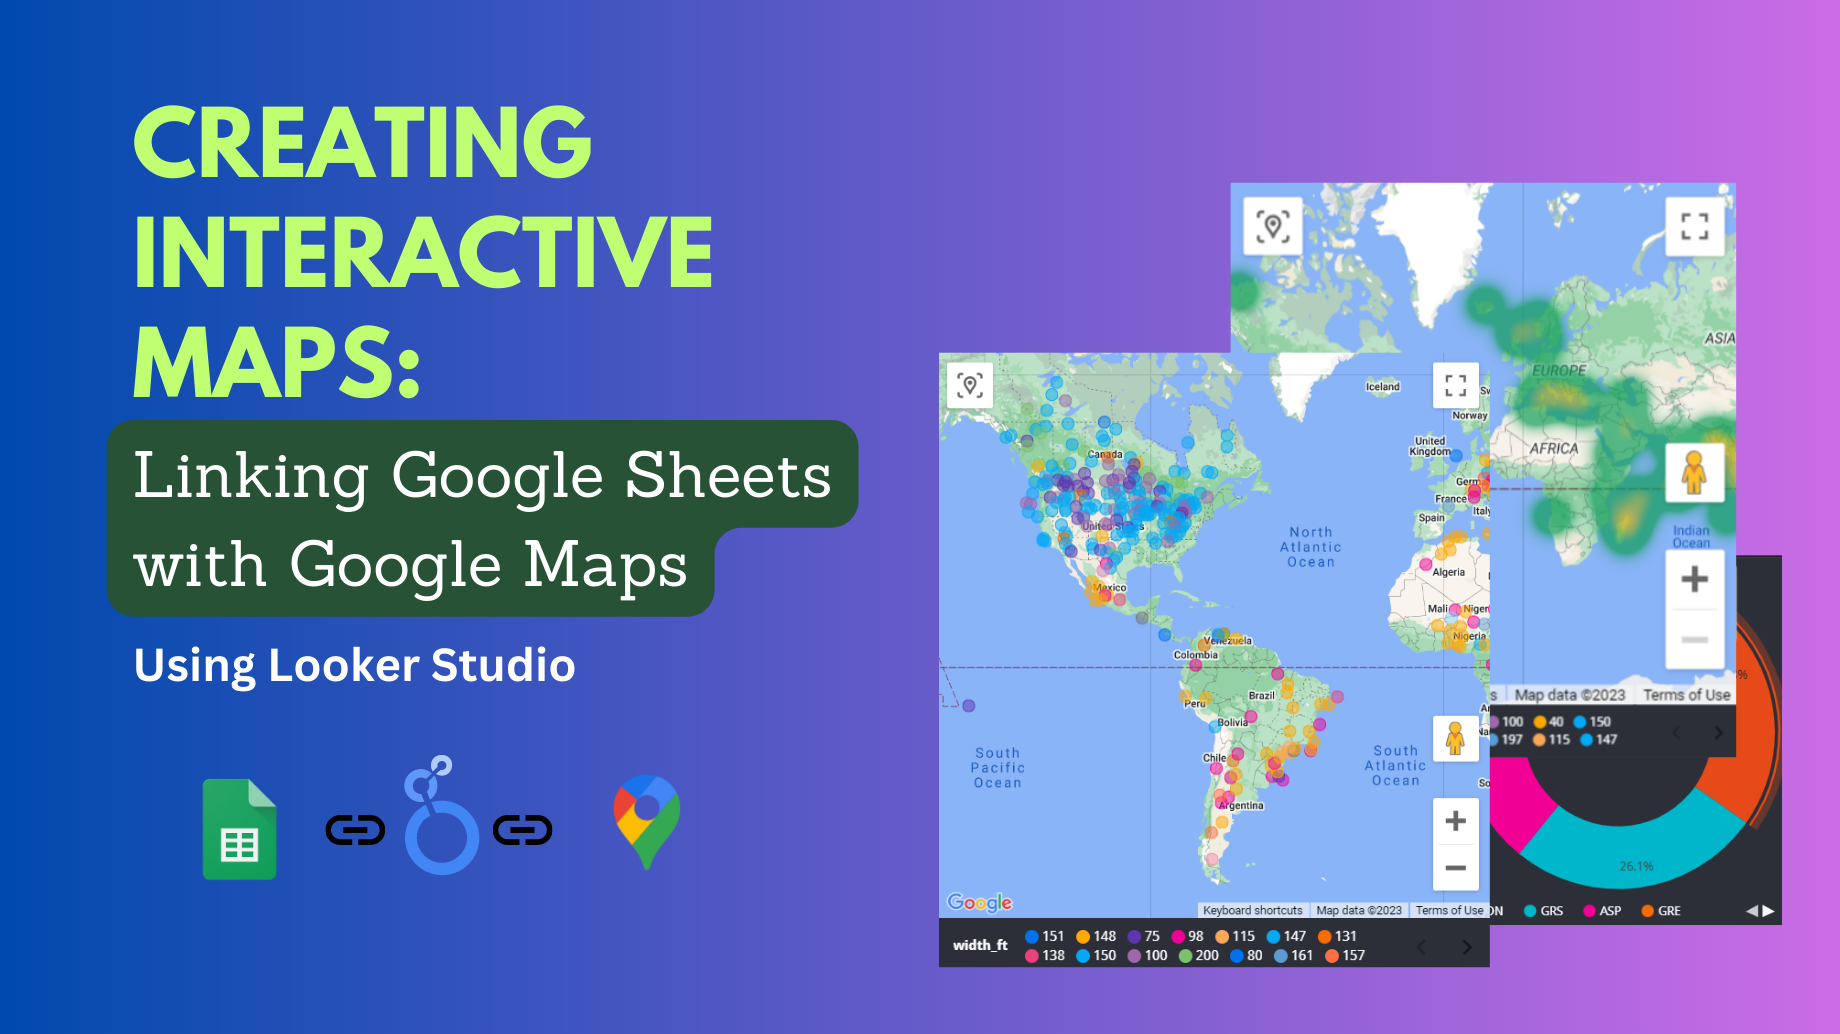 How to link Google Sheets to Google Maps and create interactive maps